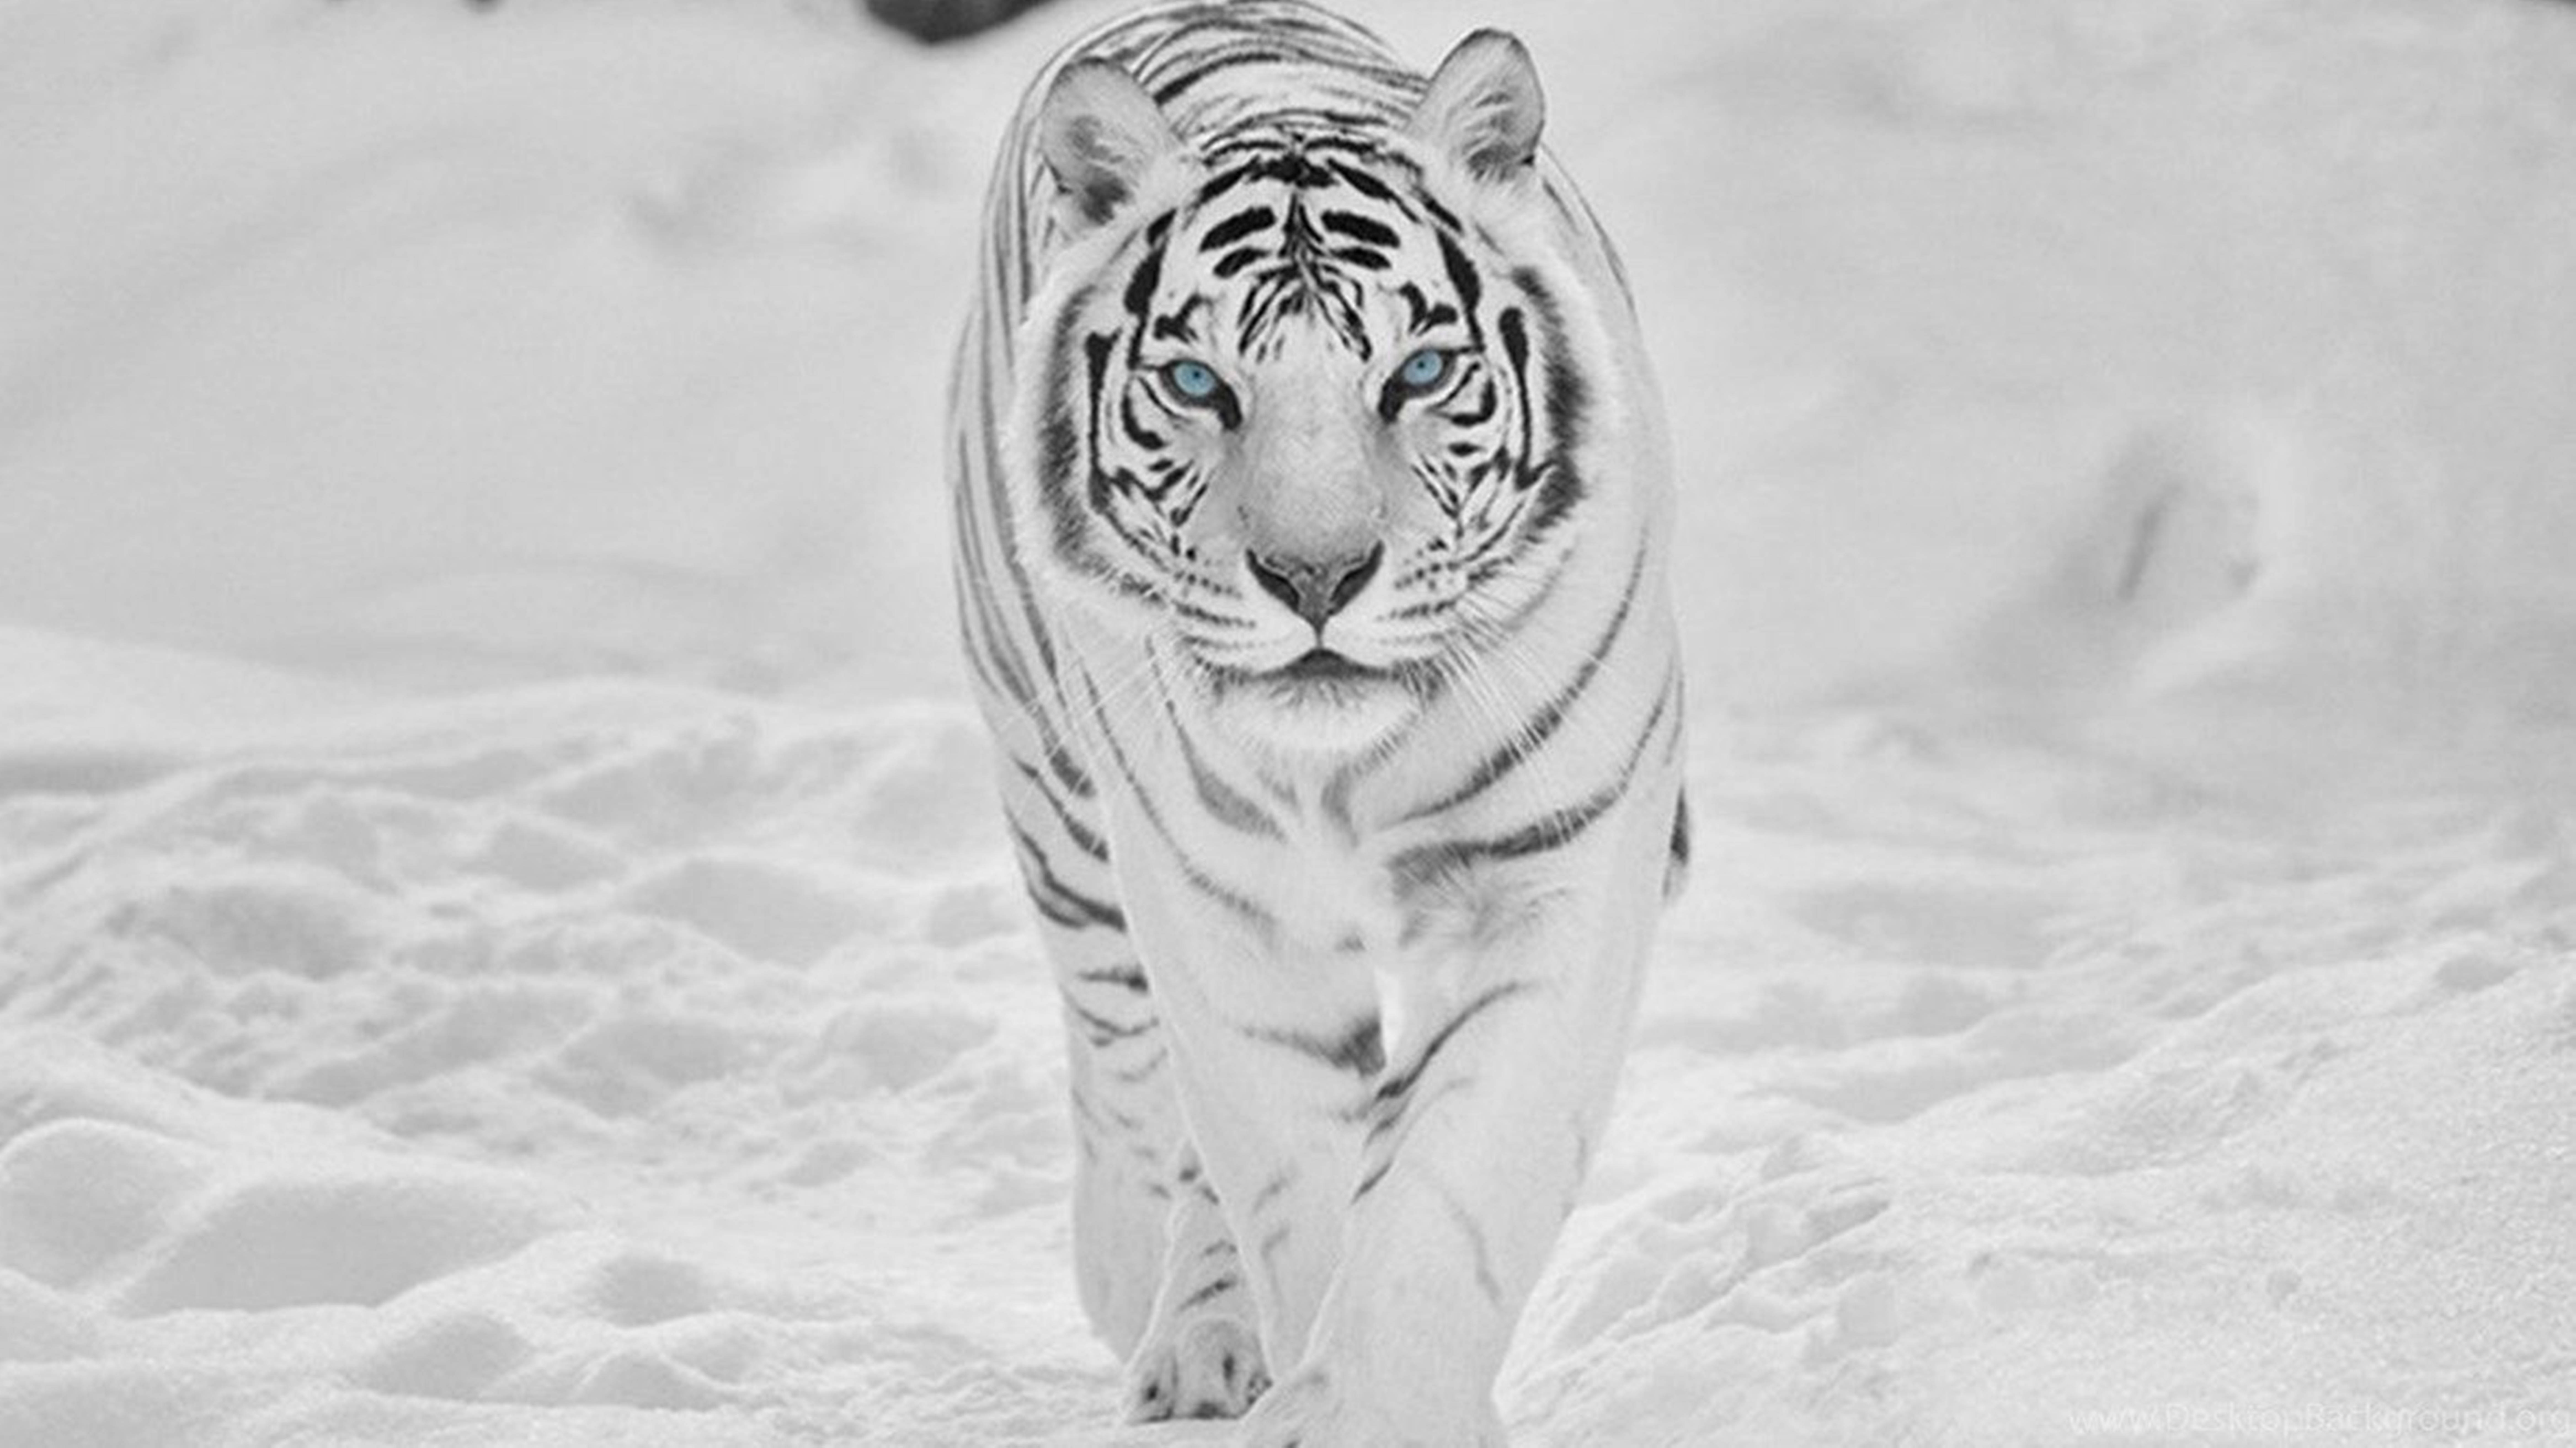 8k Tiger Uhd In Snow Background